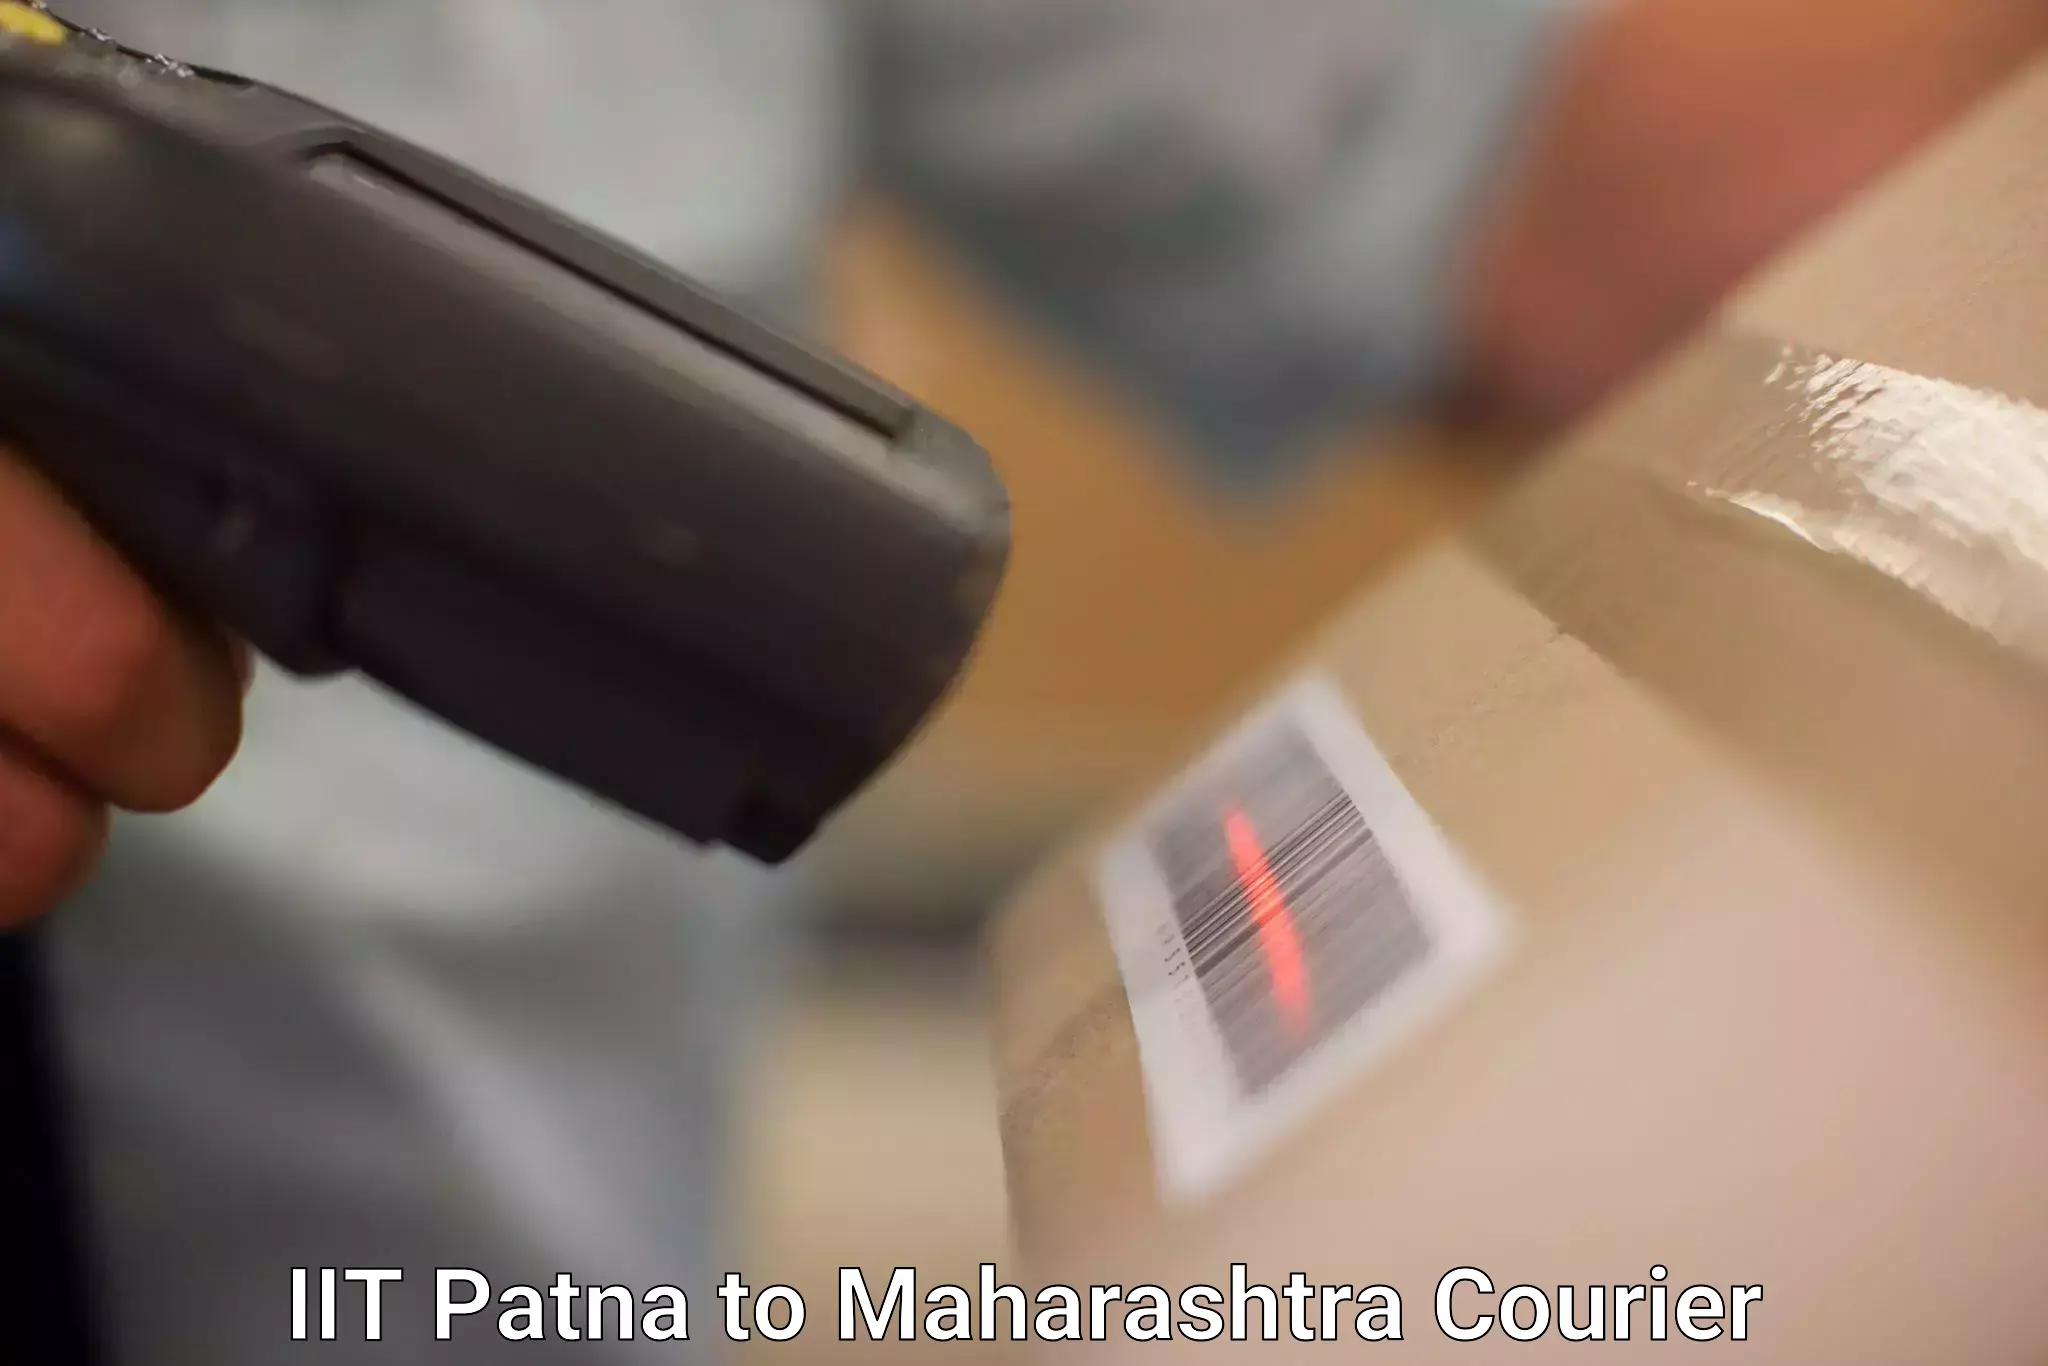 Global courier networks IIT Patna to Tasgaon